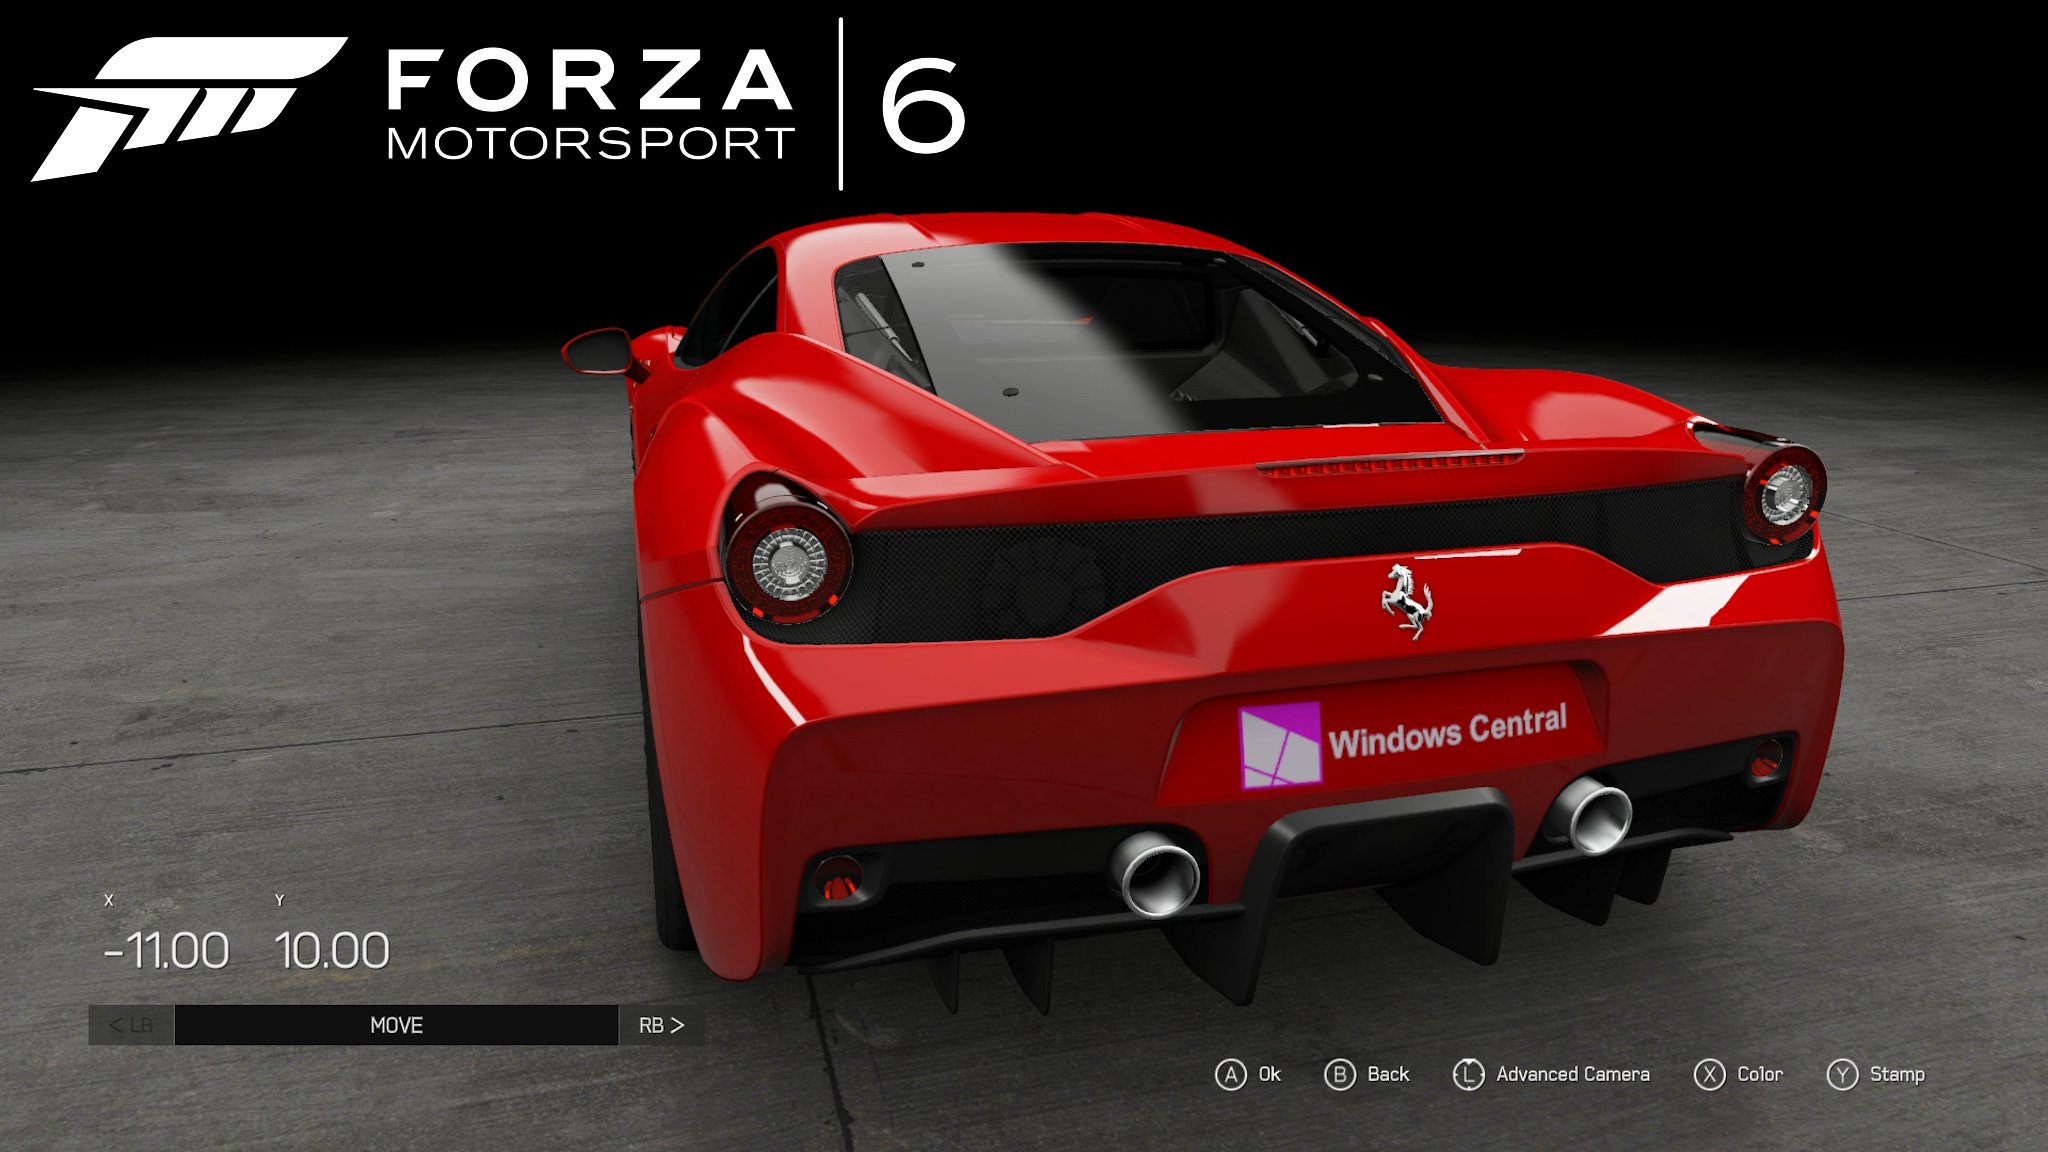 Forza-6-guide-how-to-get-and-apply-custom-decals-main.jpg